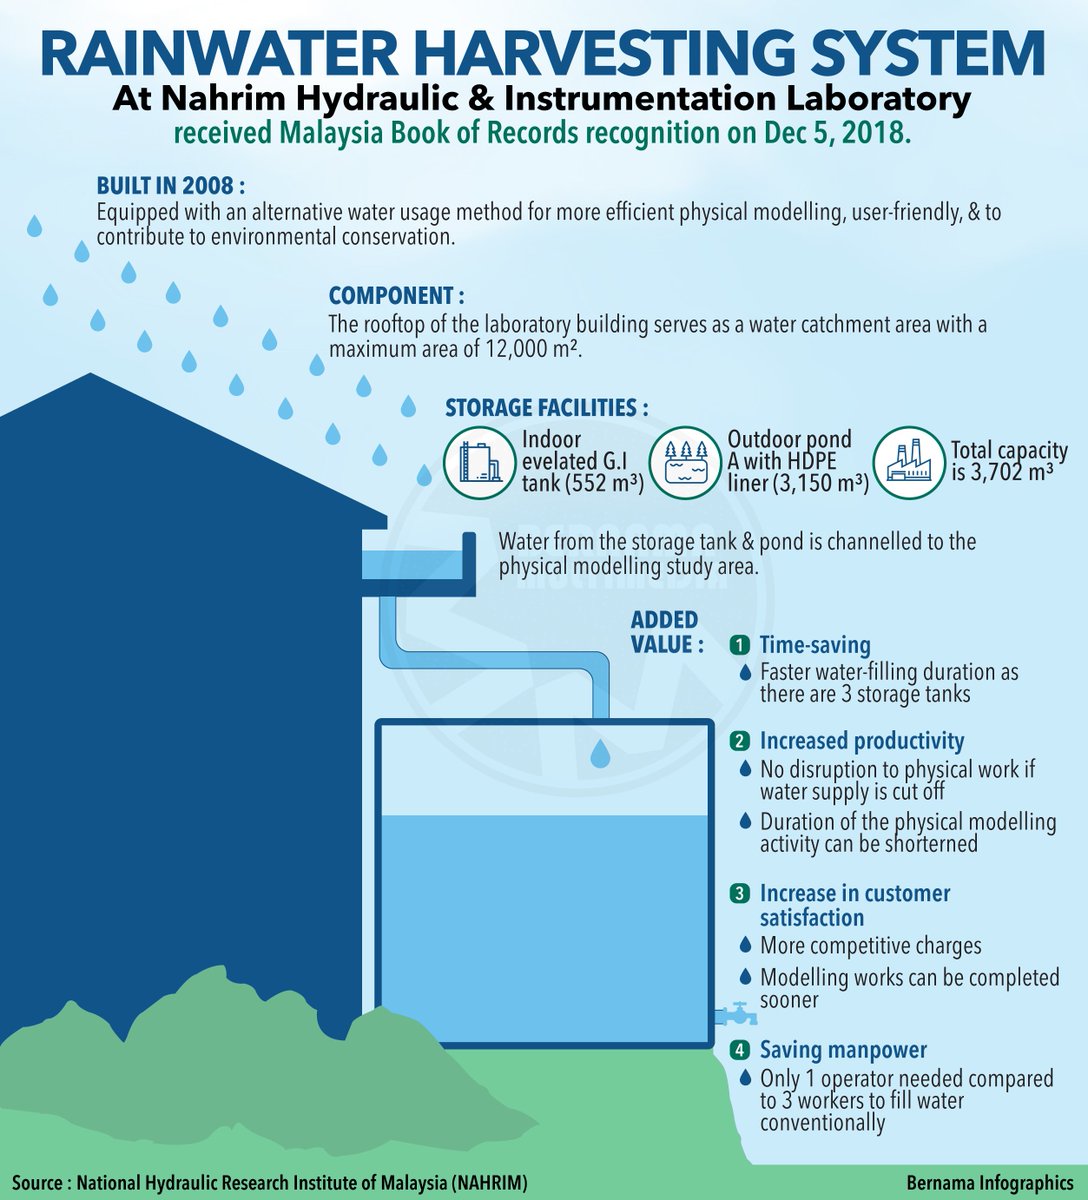 Bernama On Twitter Infographics The Rainwater Harvesting System At Nahrim Hydraulic Instrumentation Laboratory Received Malaysia Book Of Records Recognition Https T Co 1zkyglwoax